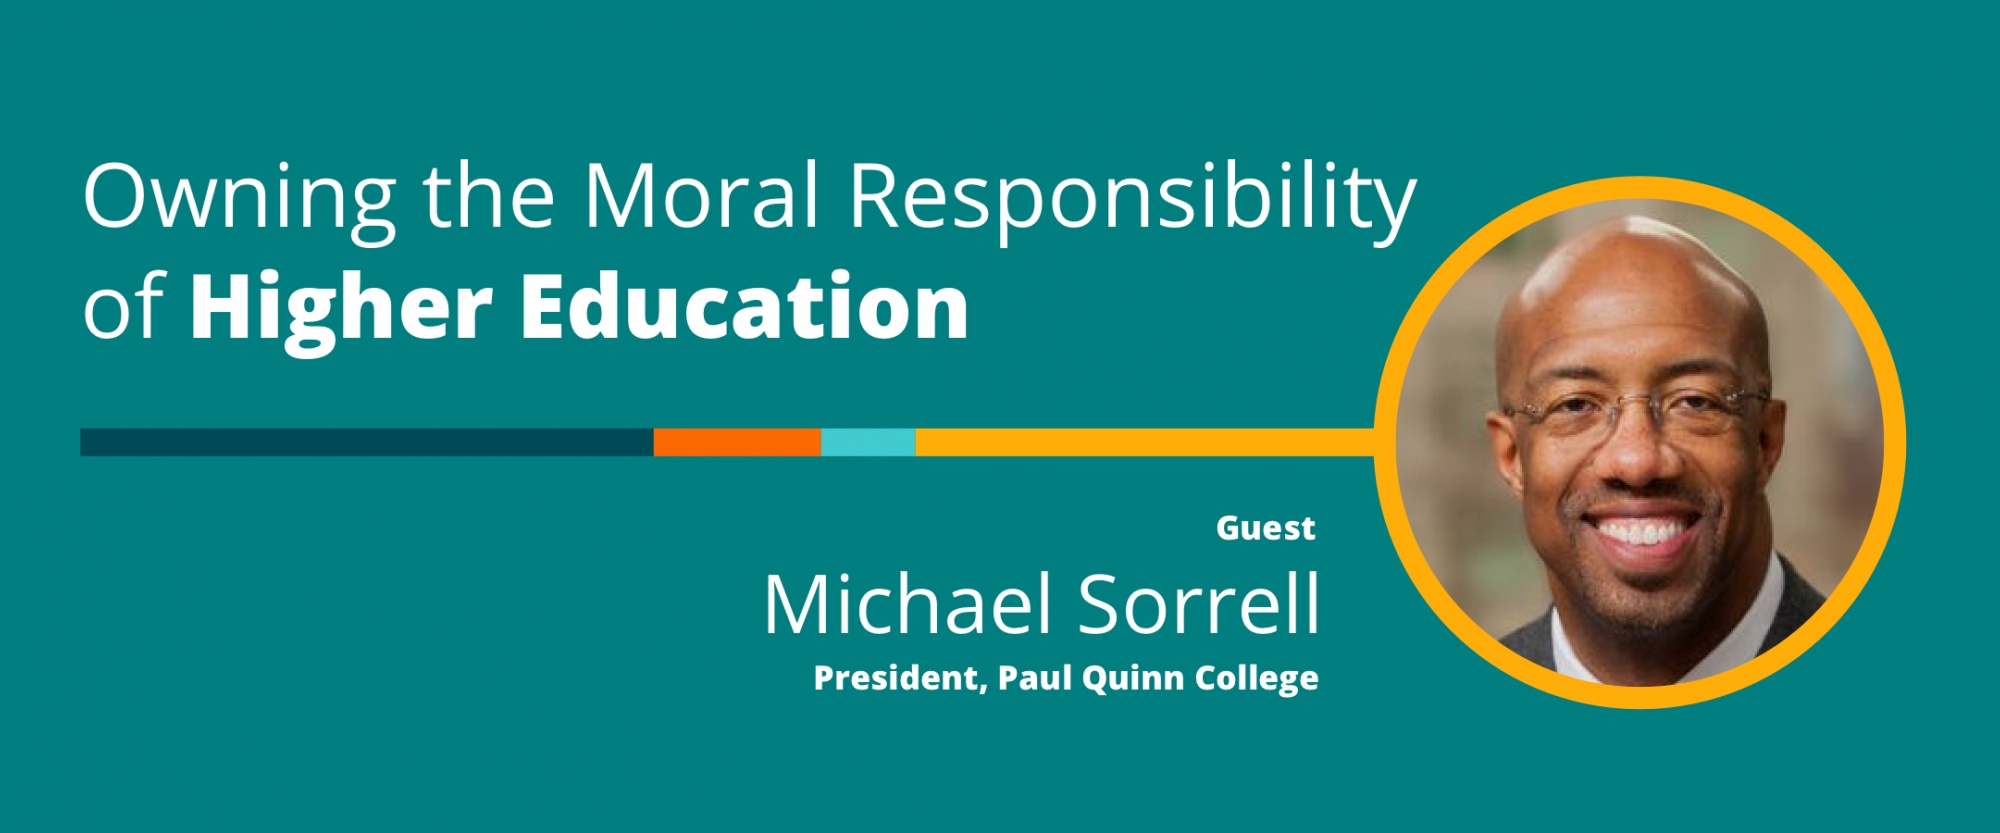 Owning the Moral Responsibility of Higher Education